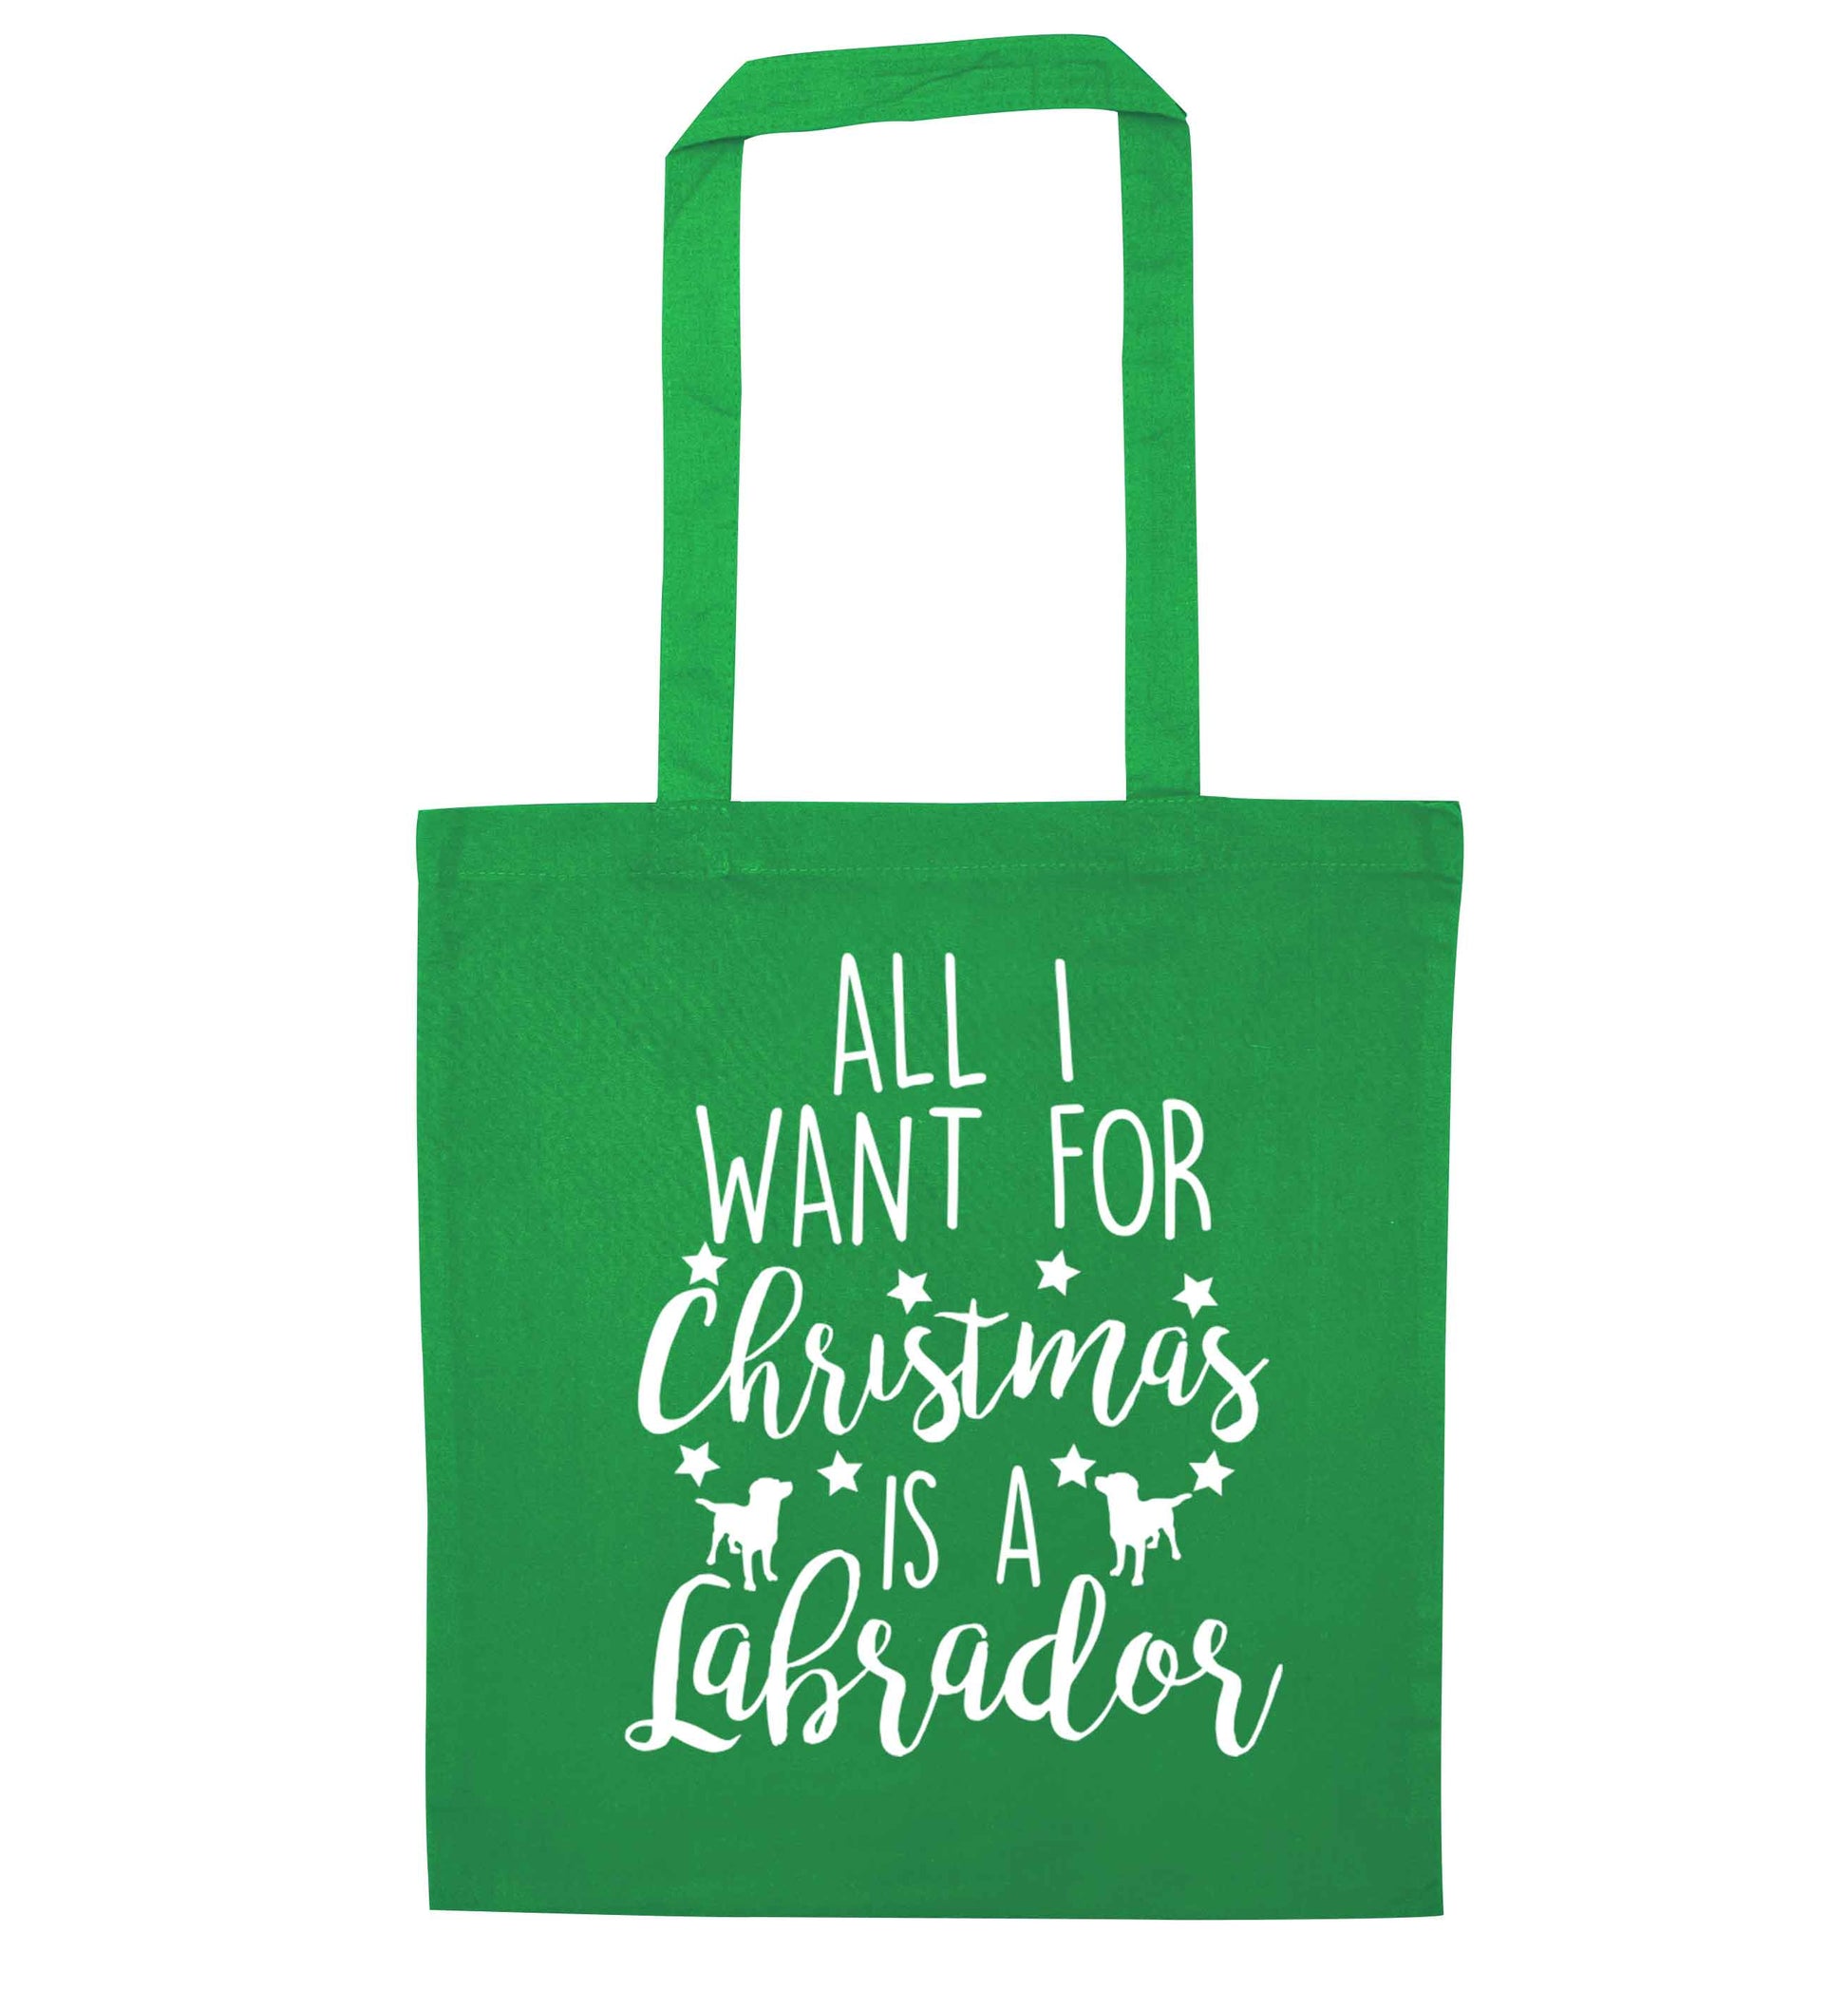 All I want for Christmas is a labrador green tote bag